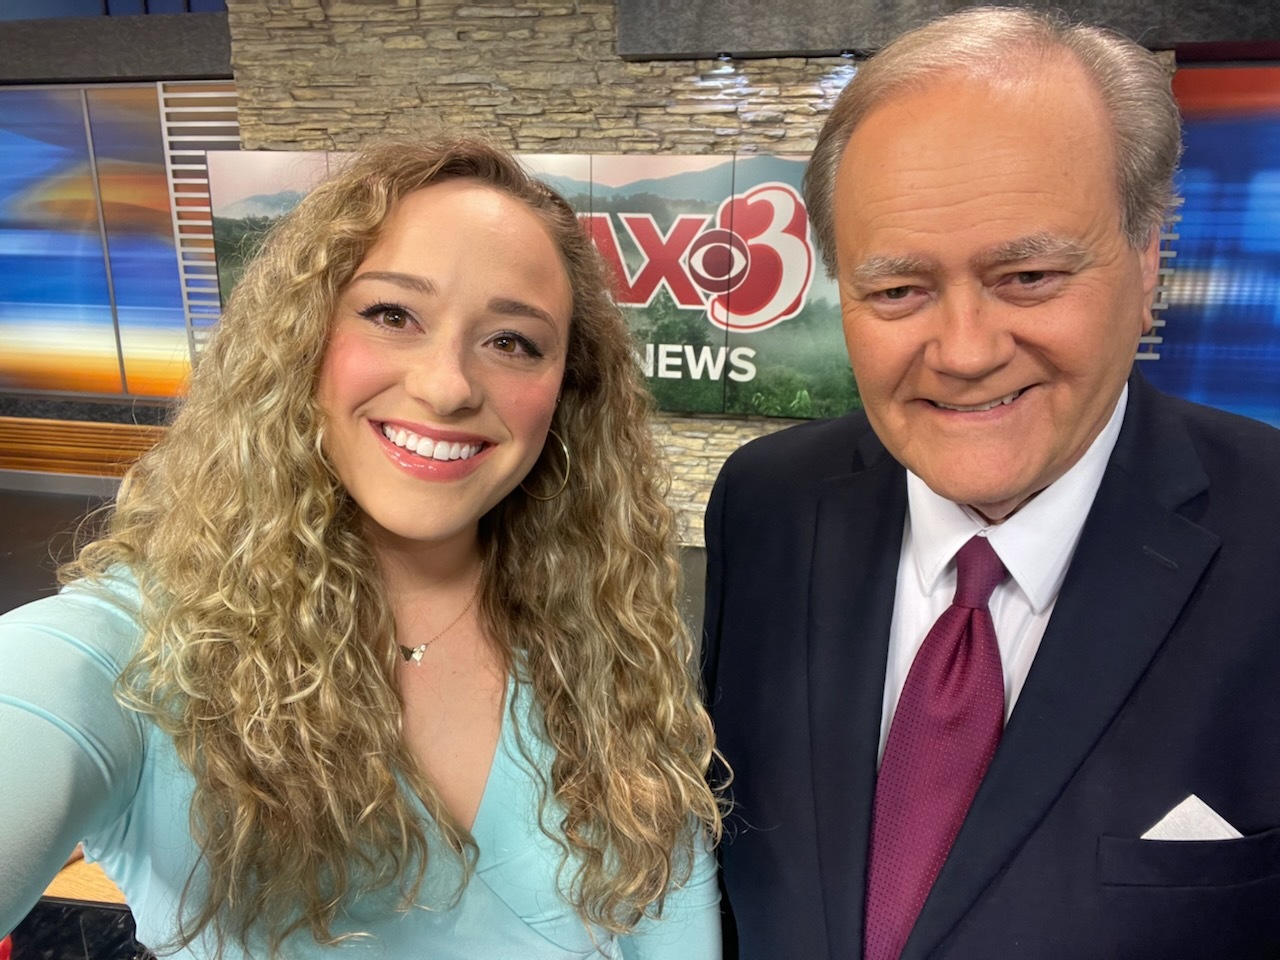 Drew Scott, right, and Christina Guessferd at WCAX in Vermont, where he works as the weekend anchor.